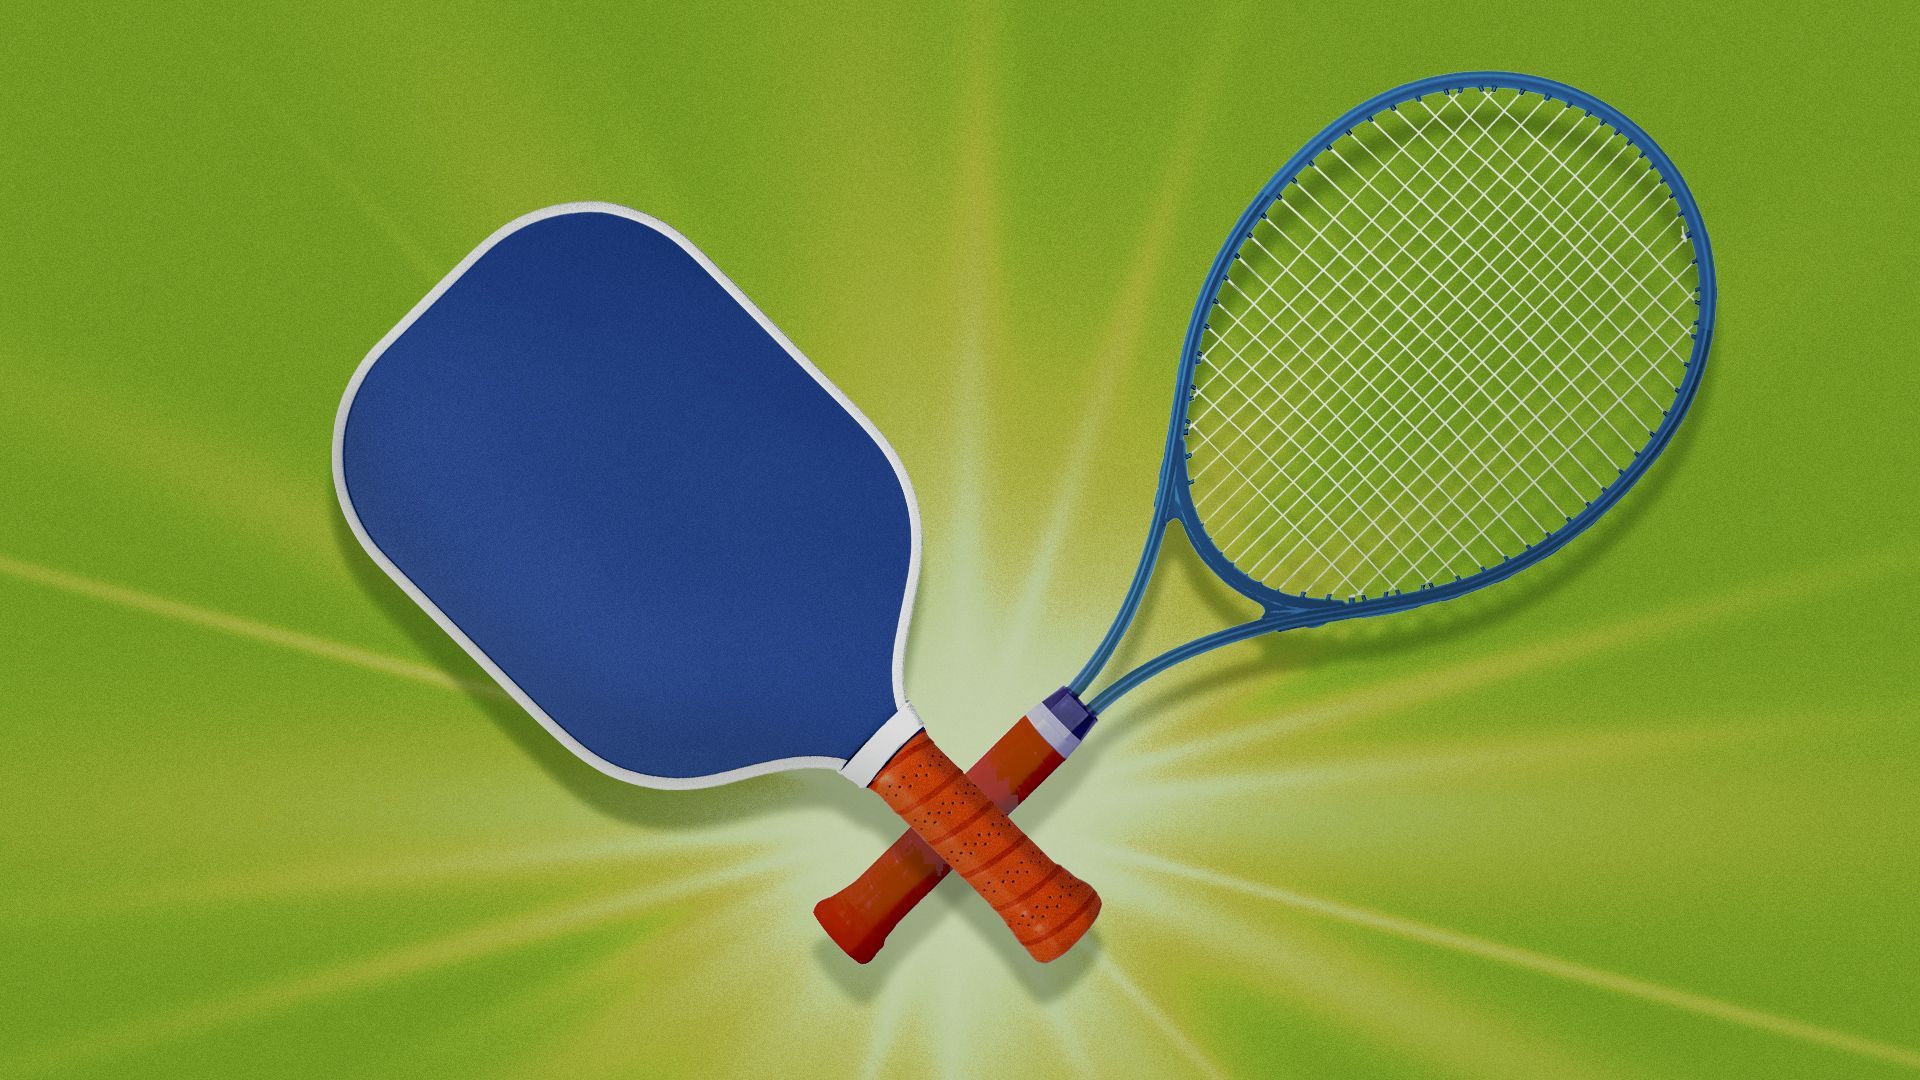 Illustration of a pickleball racket and a tennis racket in a dueling position.